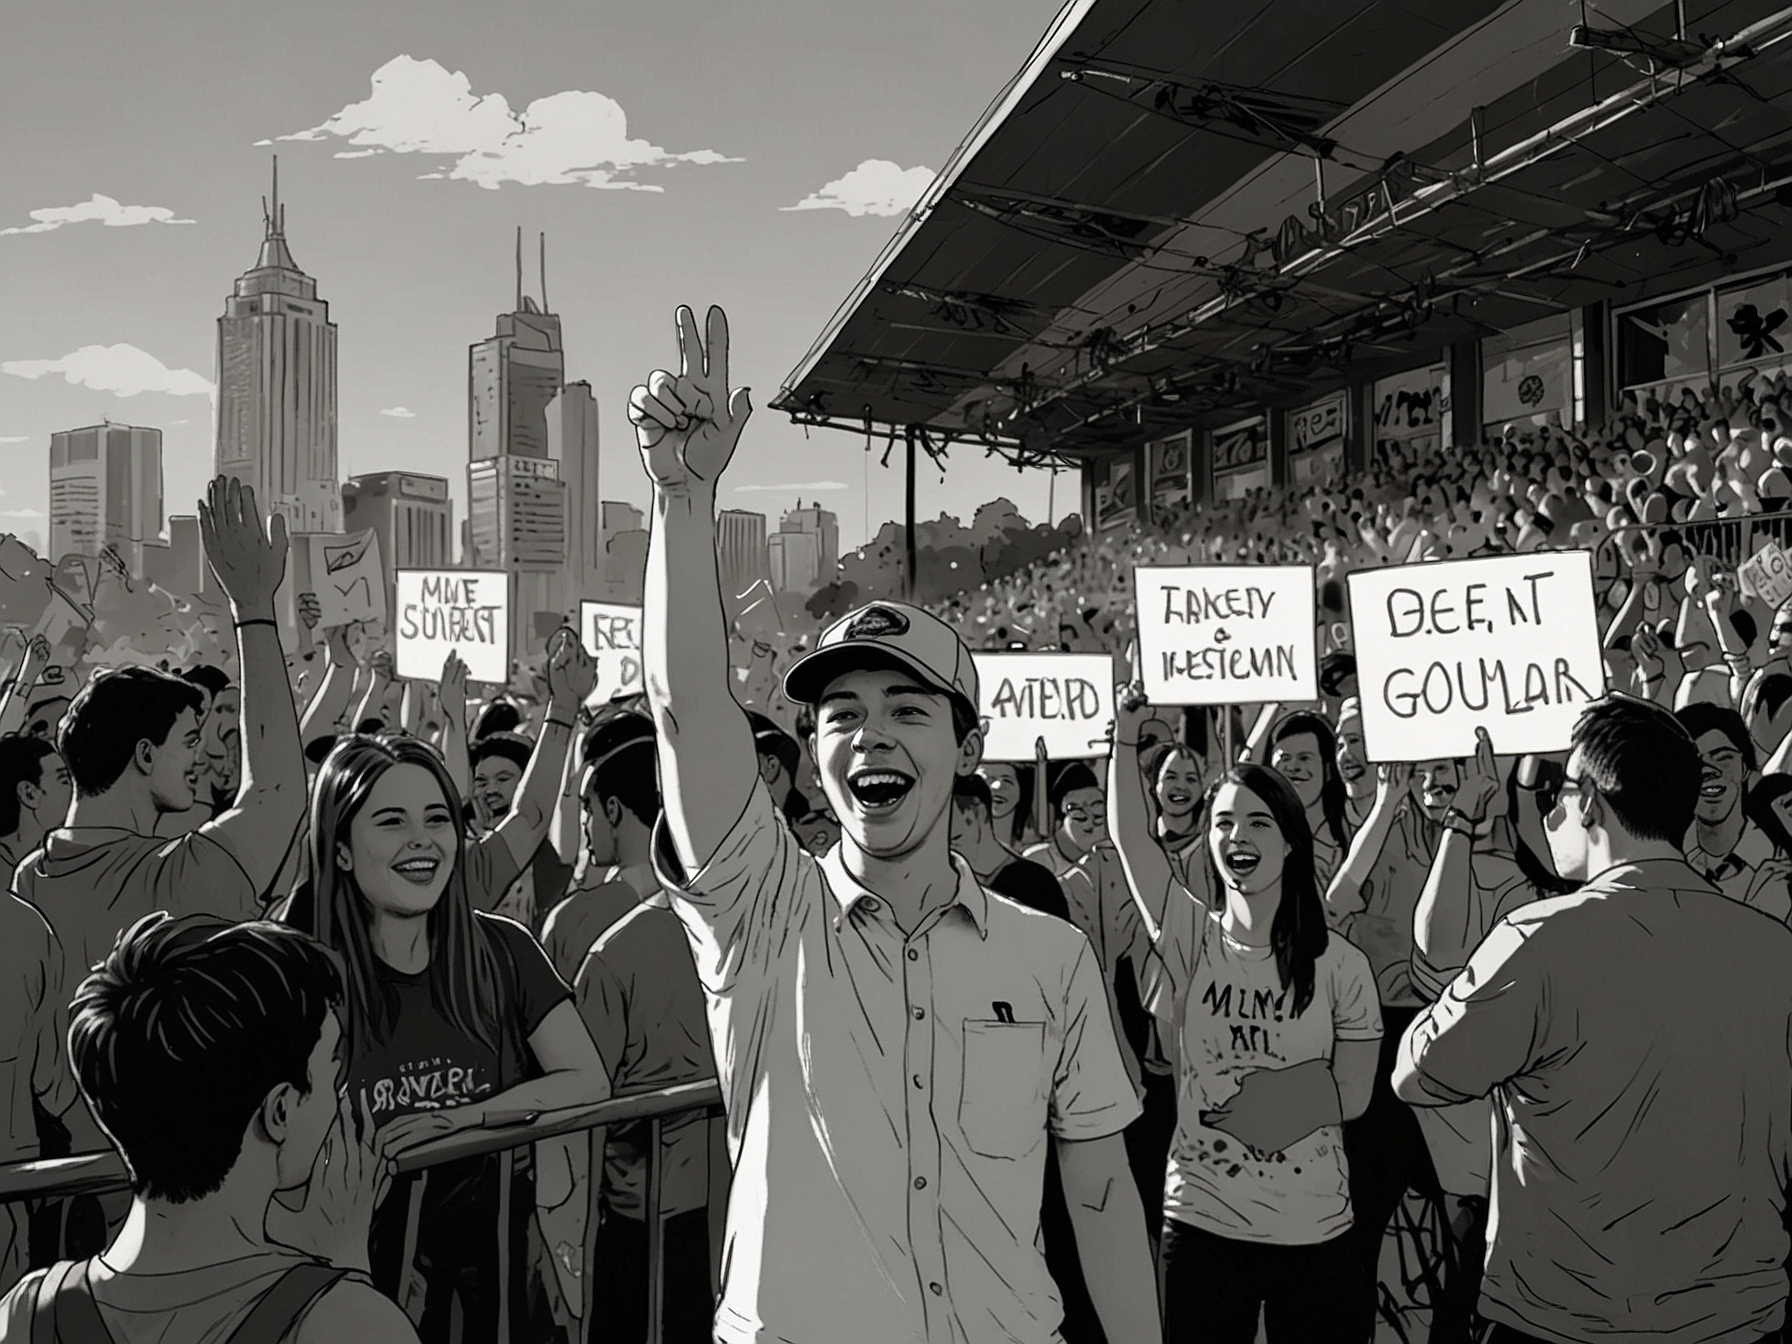 A crowd of enthusiastic fans in Australia, holding signs and cheering as MrBeast visits, showcasing his global influence and the sense of community among his followers.